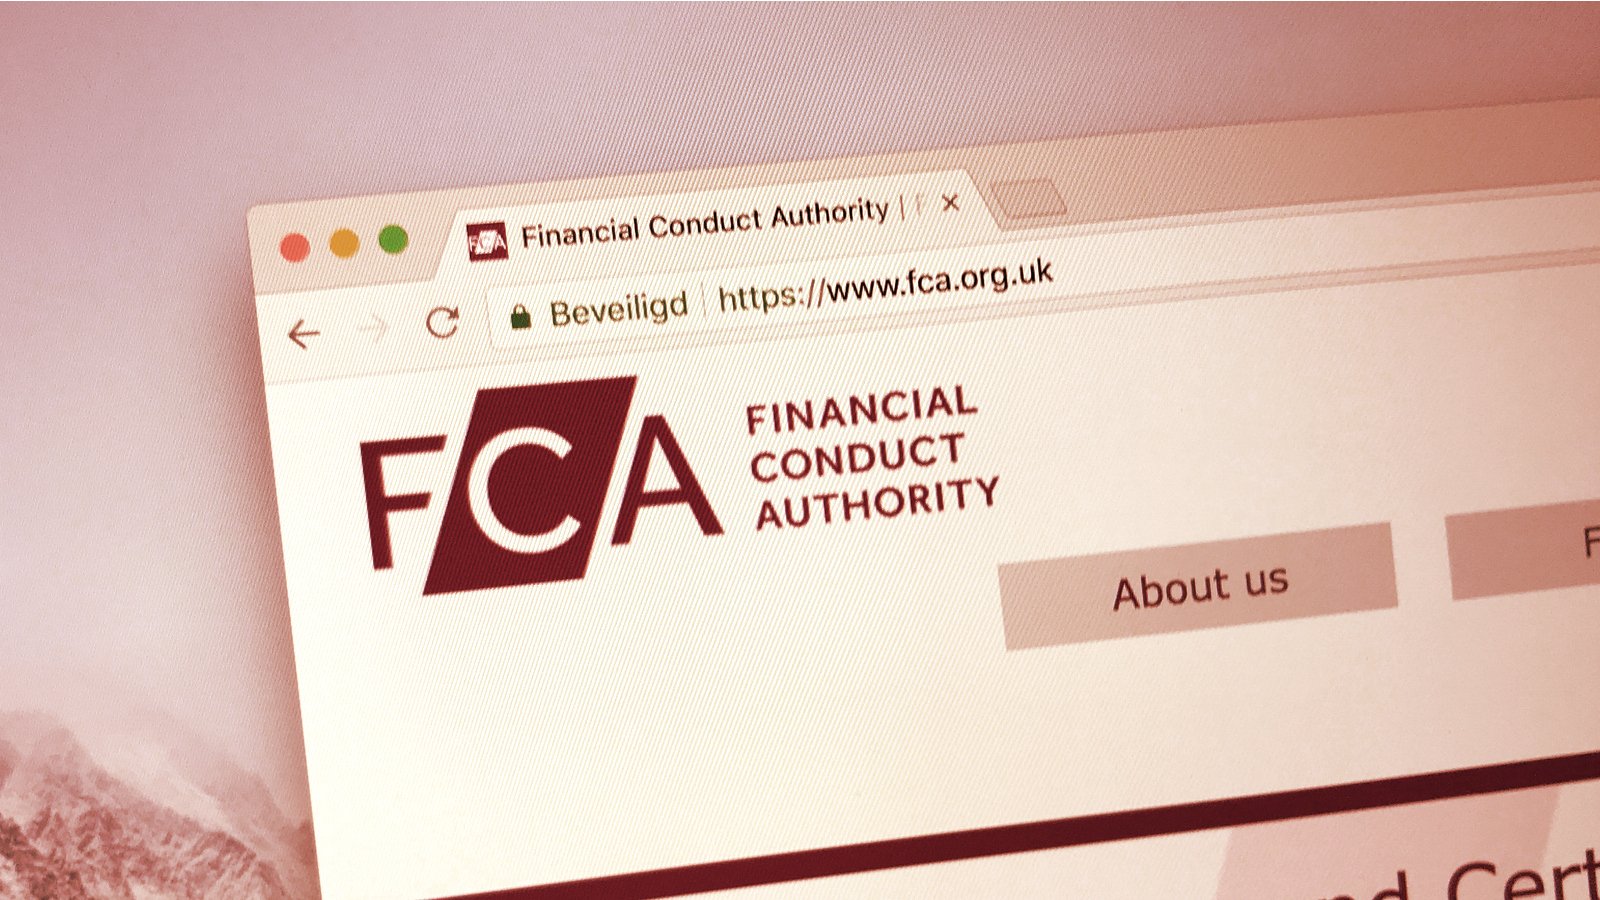 The Financial Conduct Authority. Image: Shutterstock